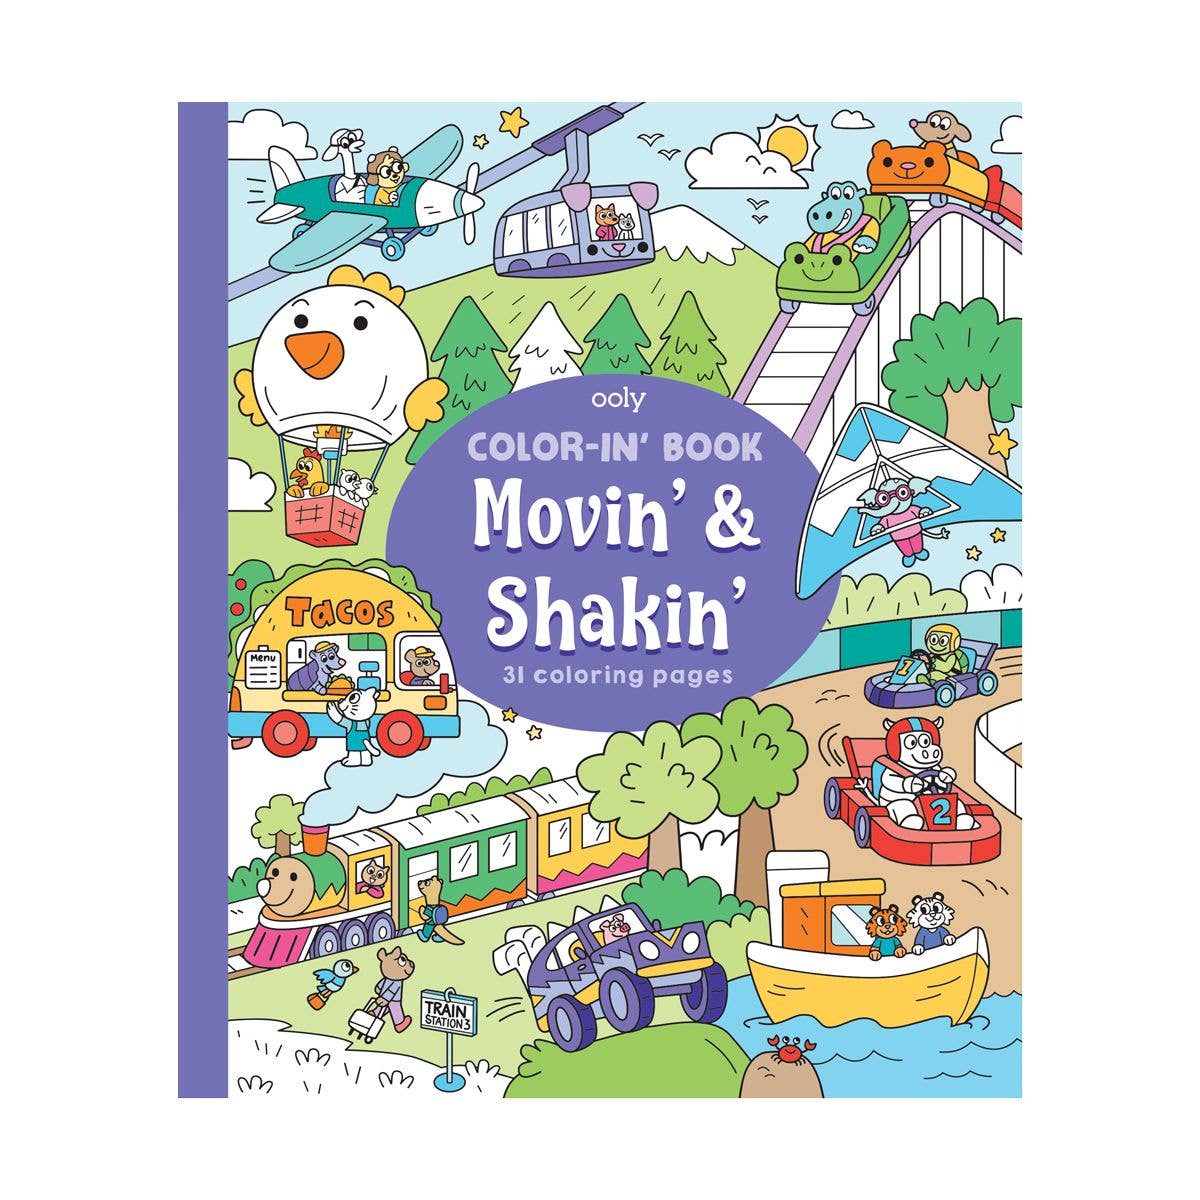 Color-In' Book: Movin' & Shakin' - Magpies Paducah